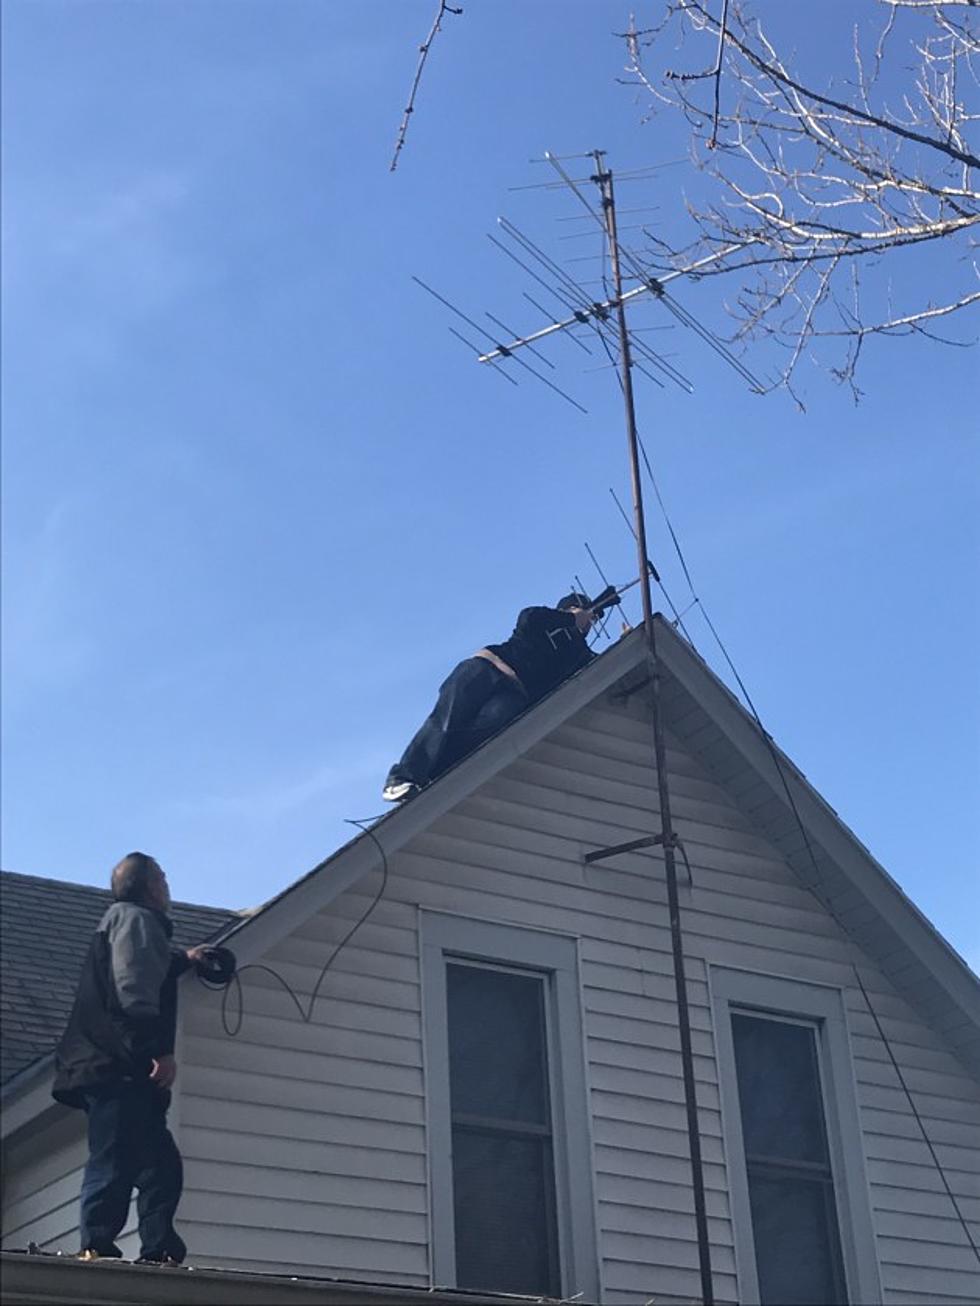 Up On The Rooftop Fixing Grandma’s Antenna